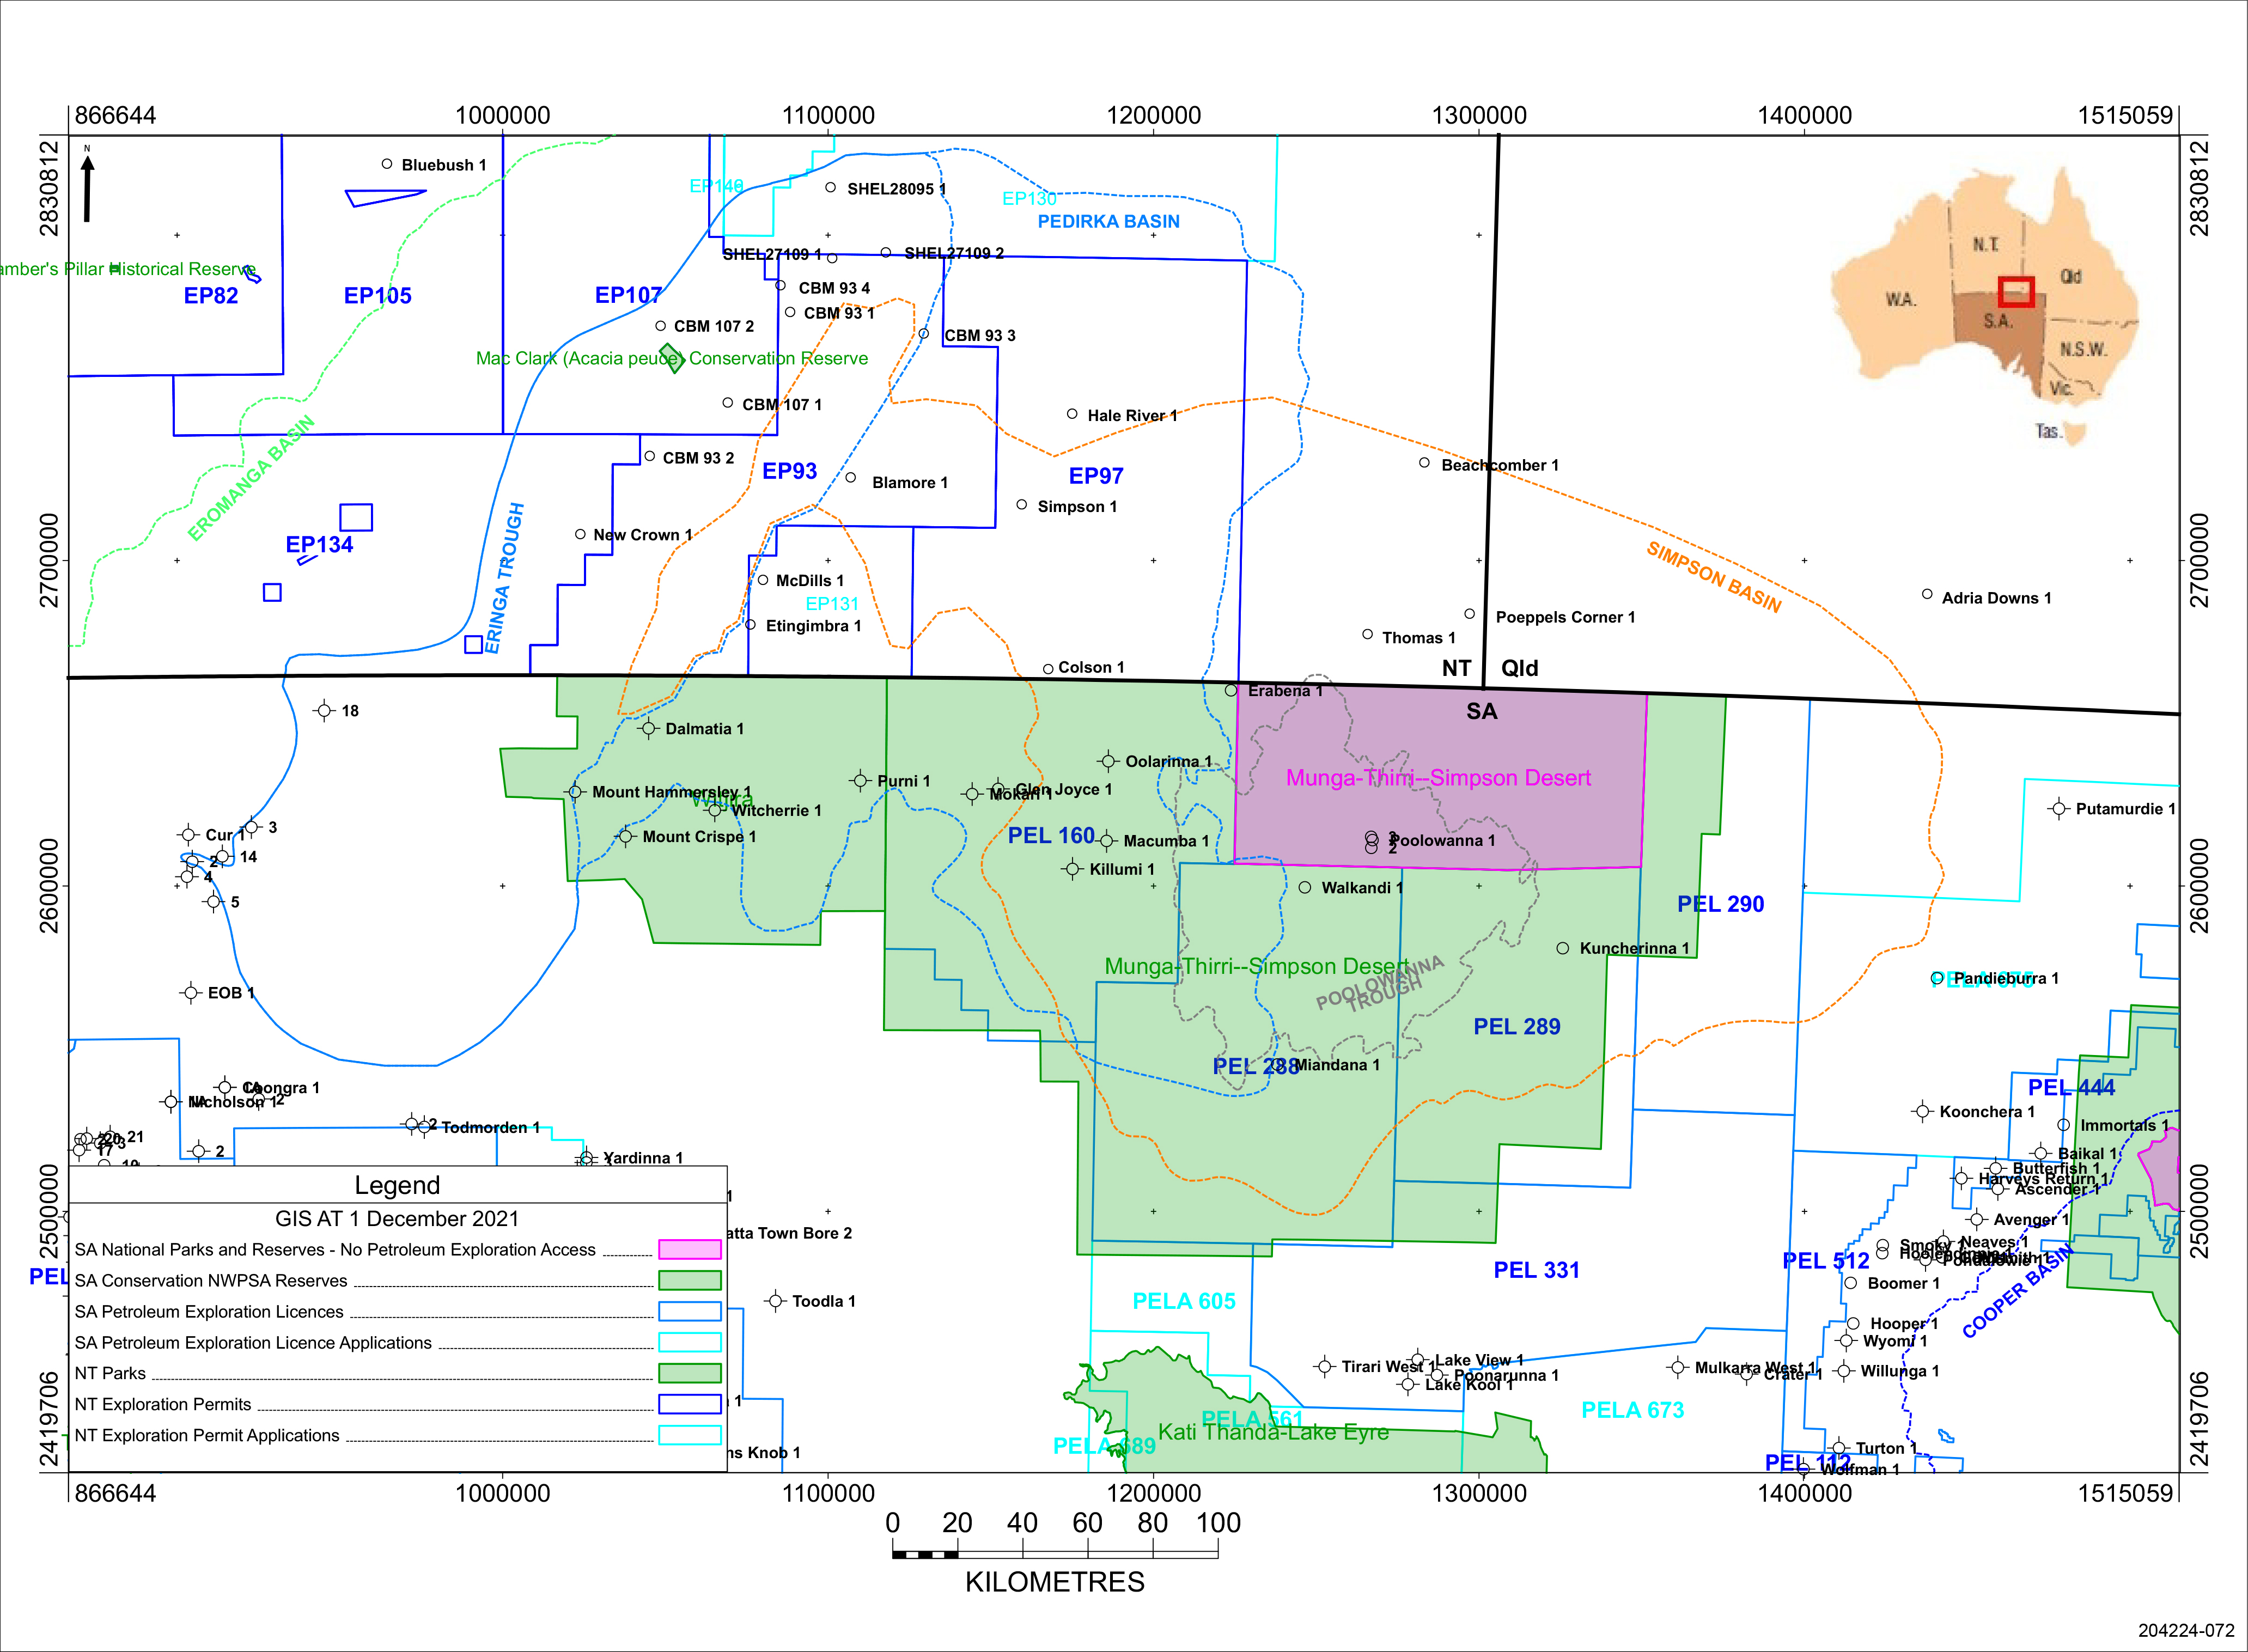 Petroleum exploration permits, regional reserves and conservation parks in the Poolowanna Trough region as at December 2021